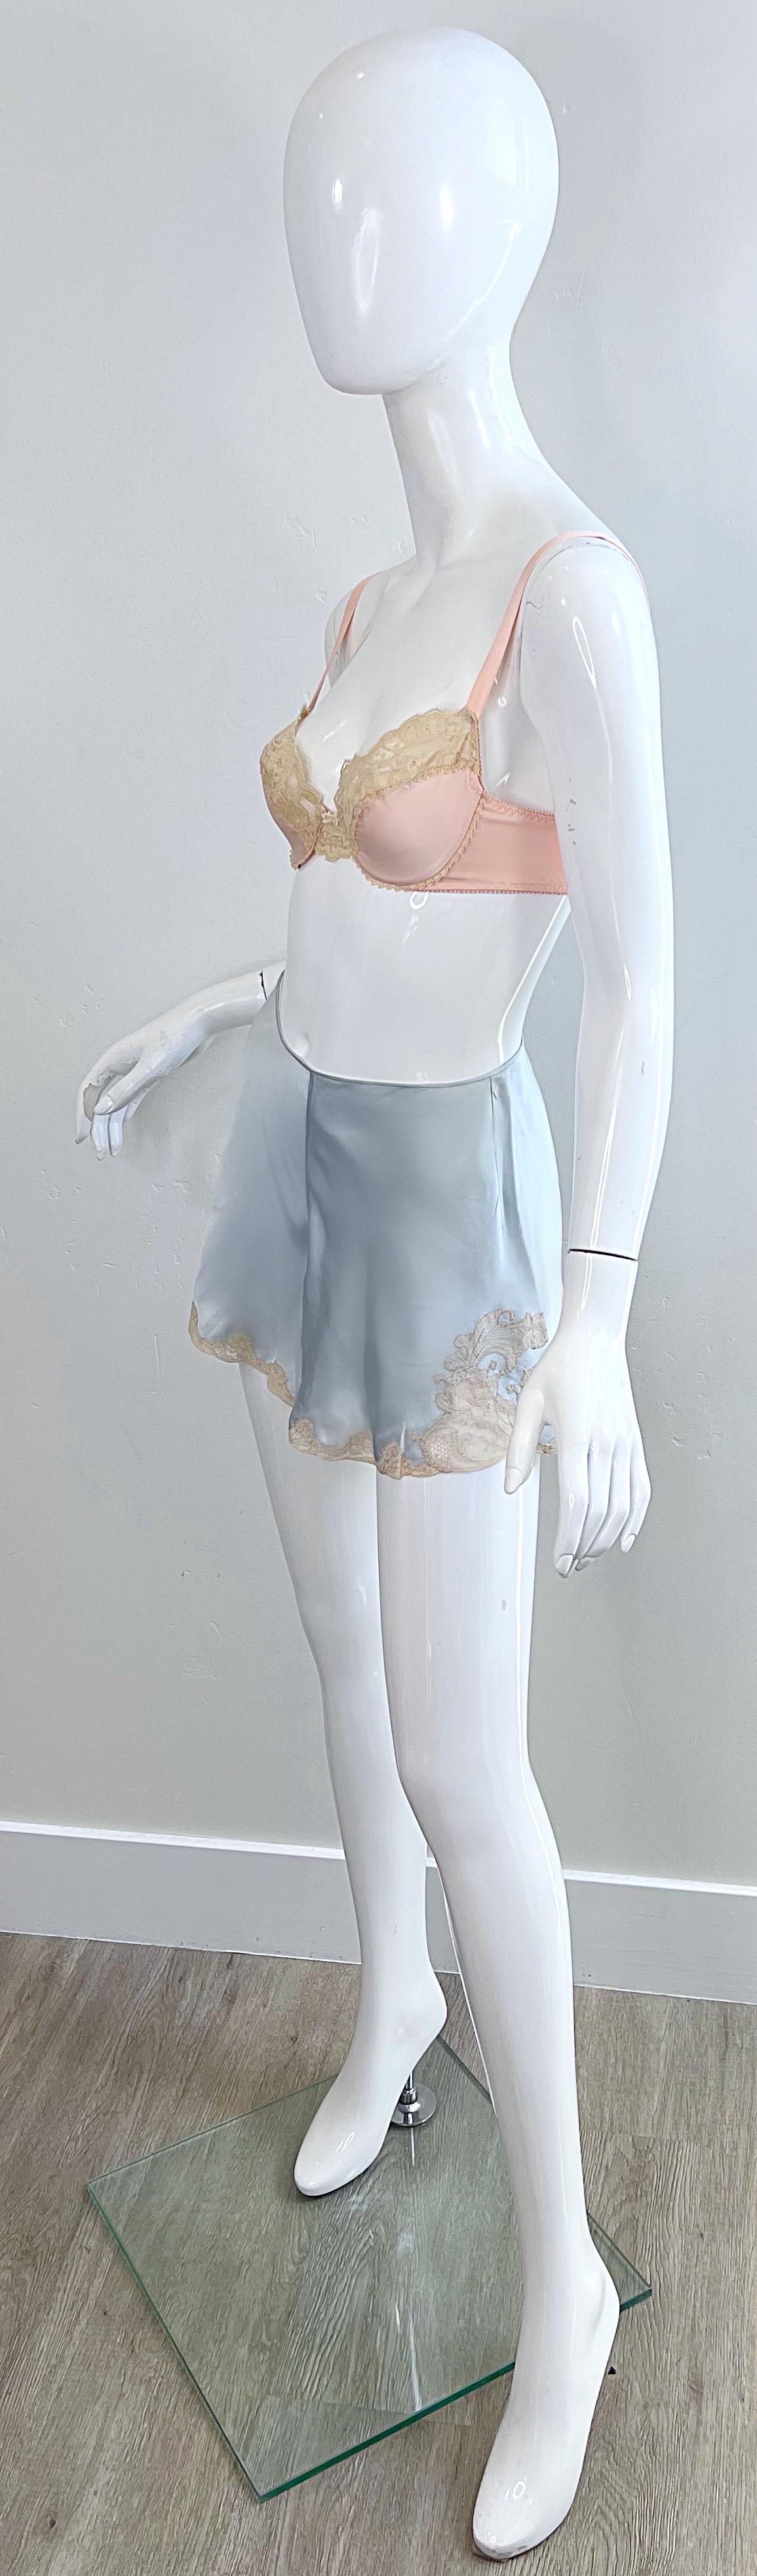 1960s Christian Dior 32A Silk Three Piece Bloomers Bra 60s Vintage Lingerie Set For Sale 5